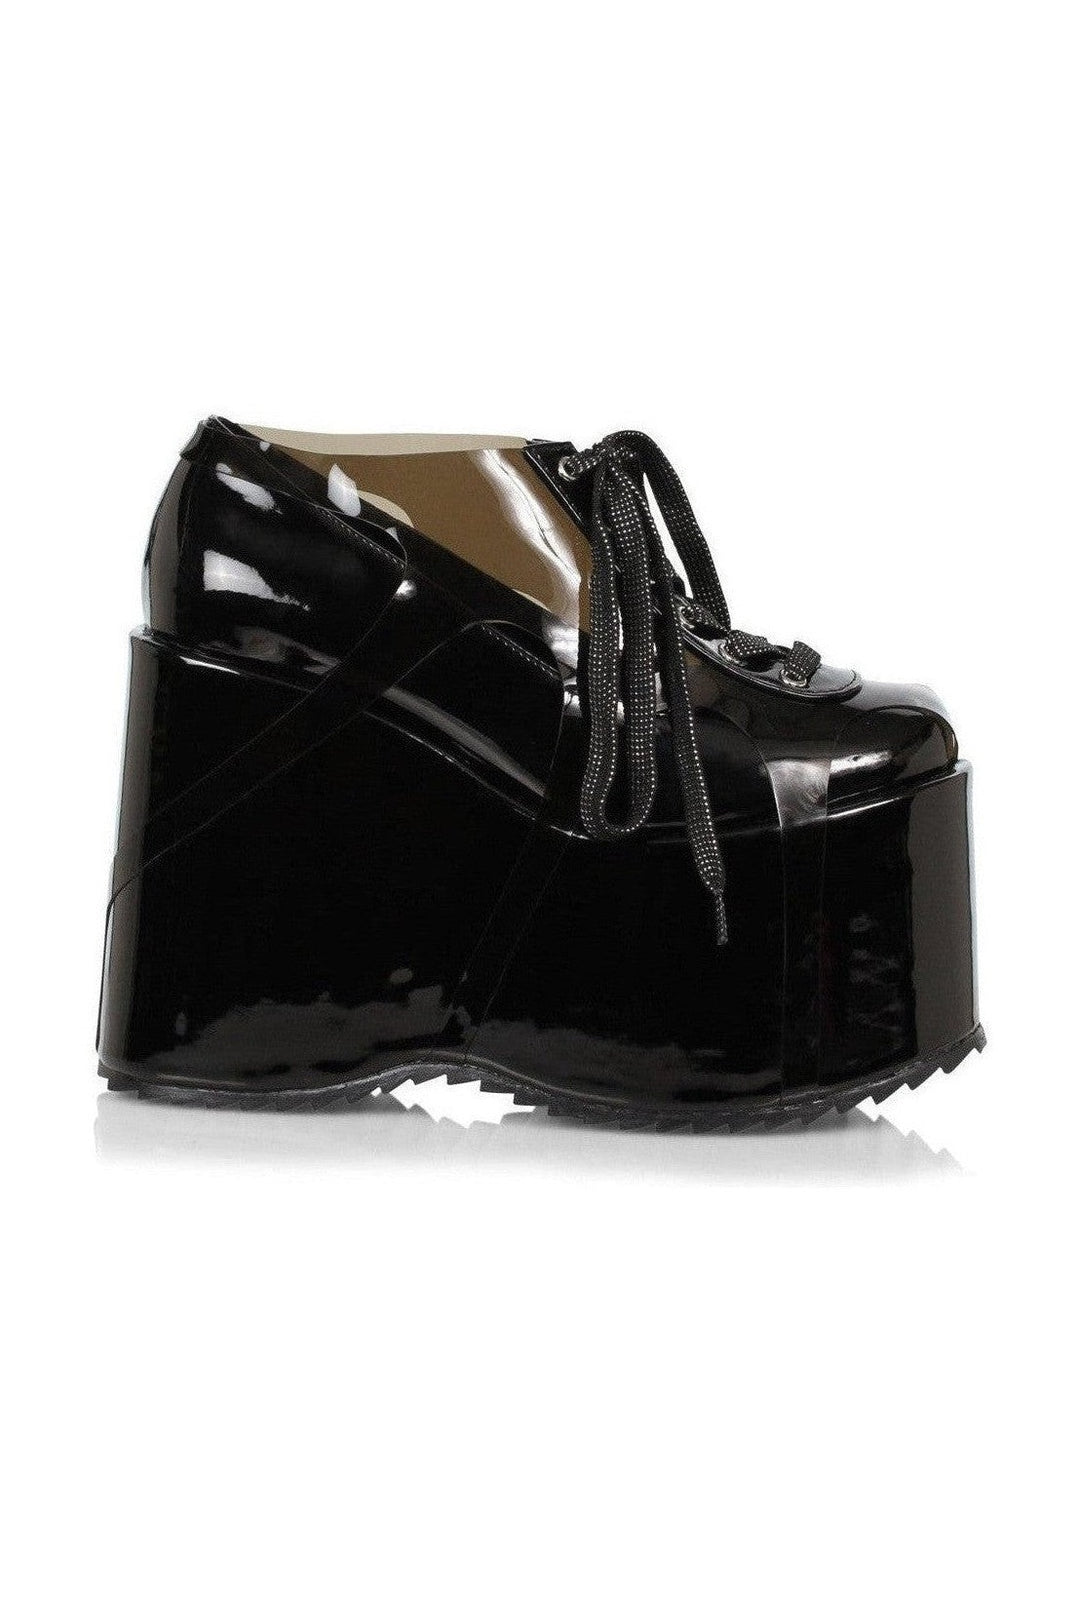 500-SUNNY Wedge | Black Faux Leather-Wedge-Ellie Shoes-SEXYSHOES.COM